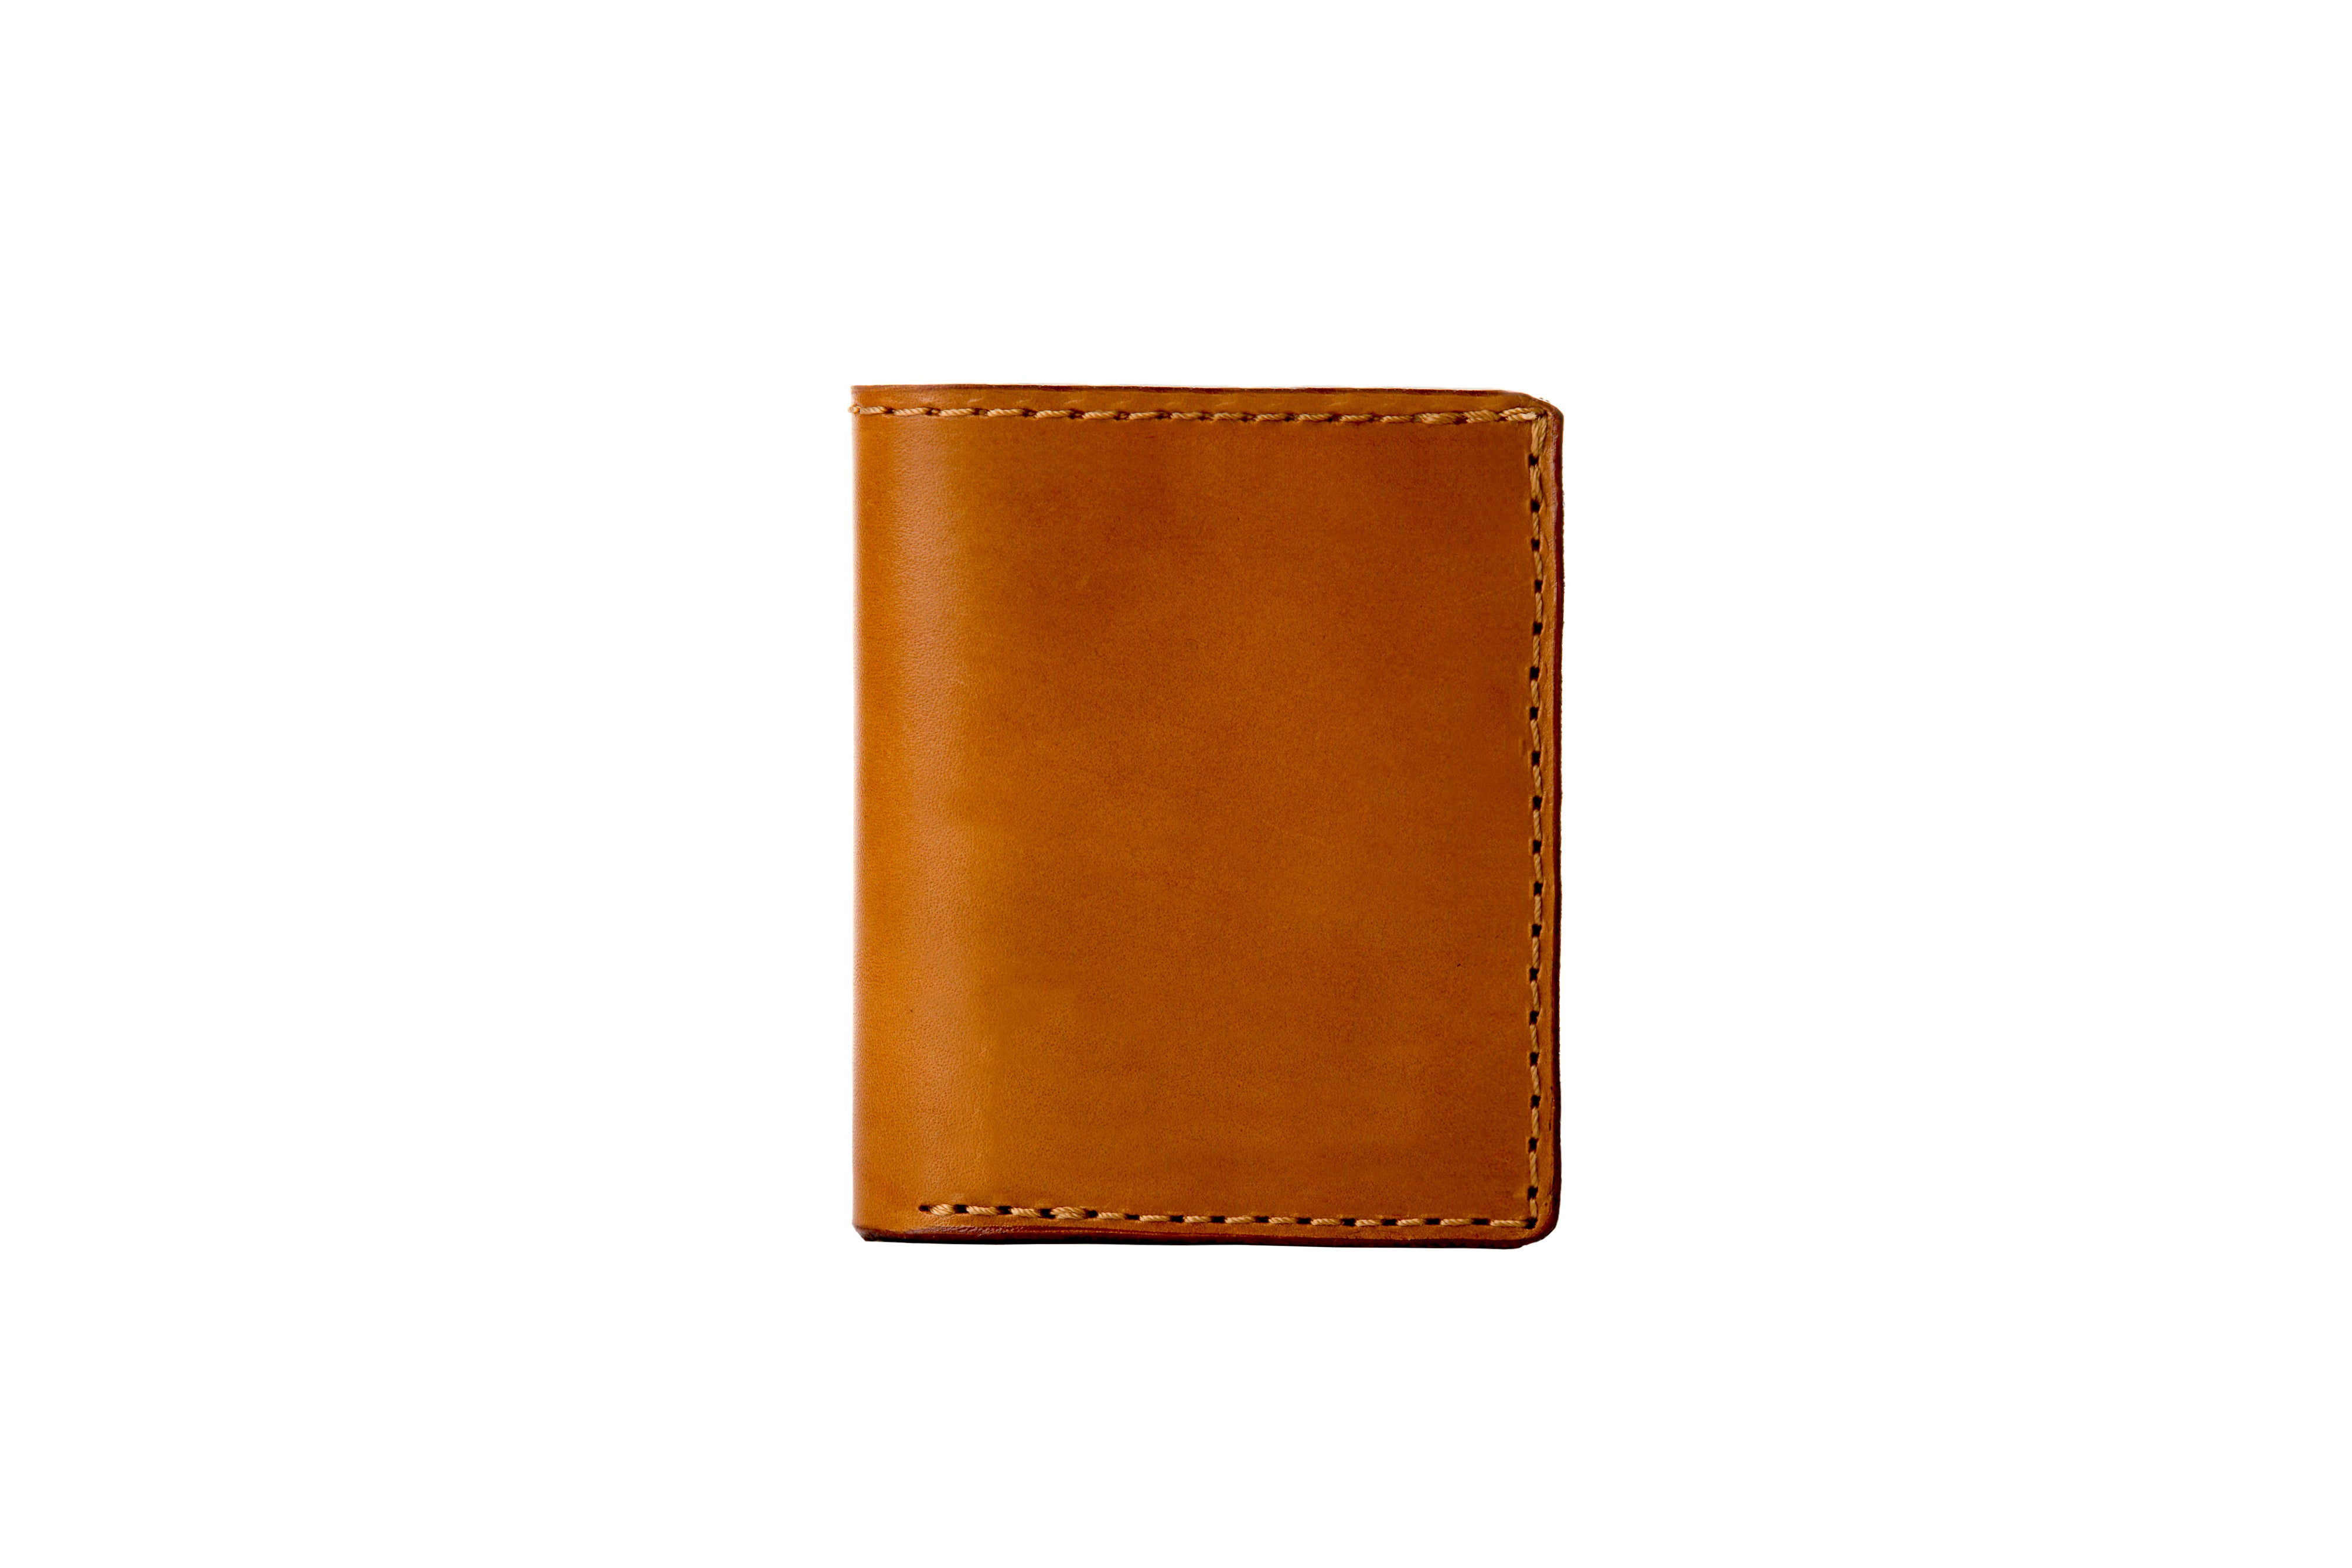 Leather Wallet Rectangular The Dust Company su Artisia Store